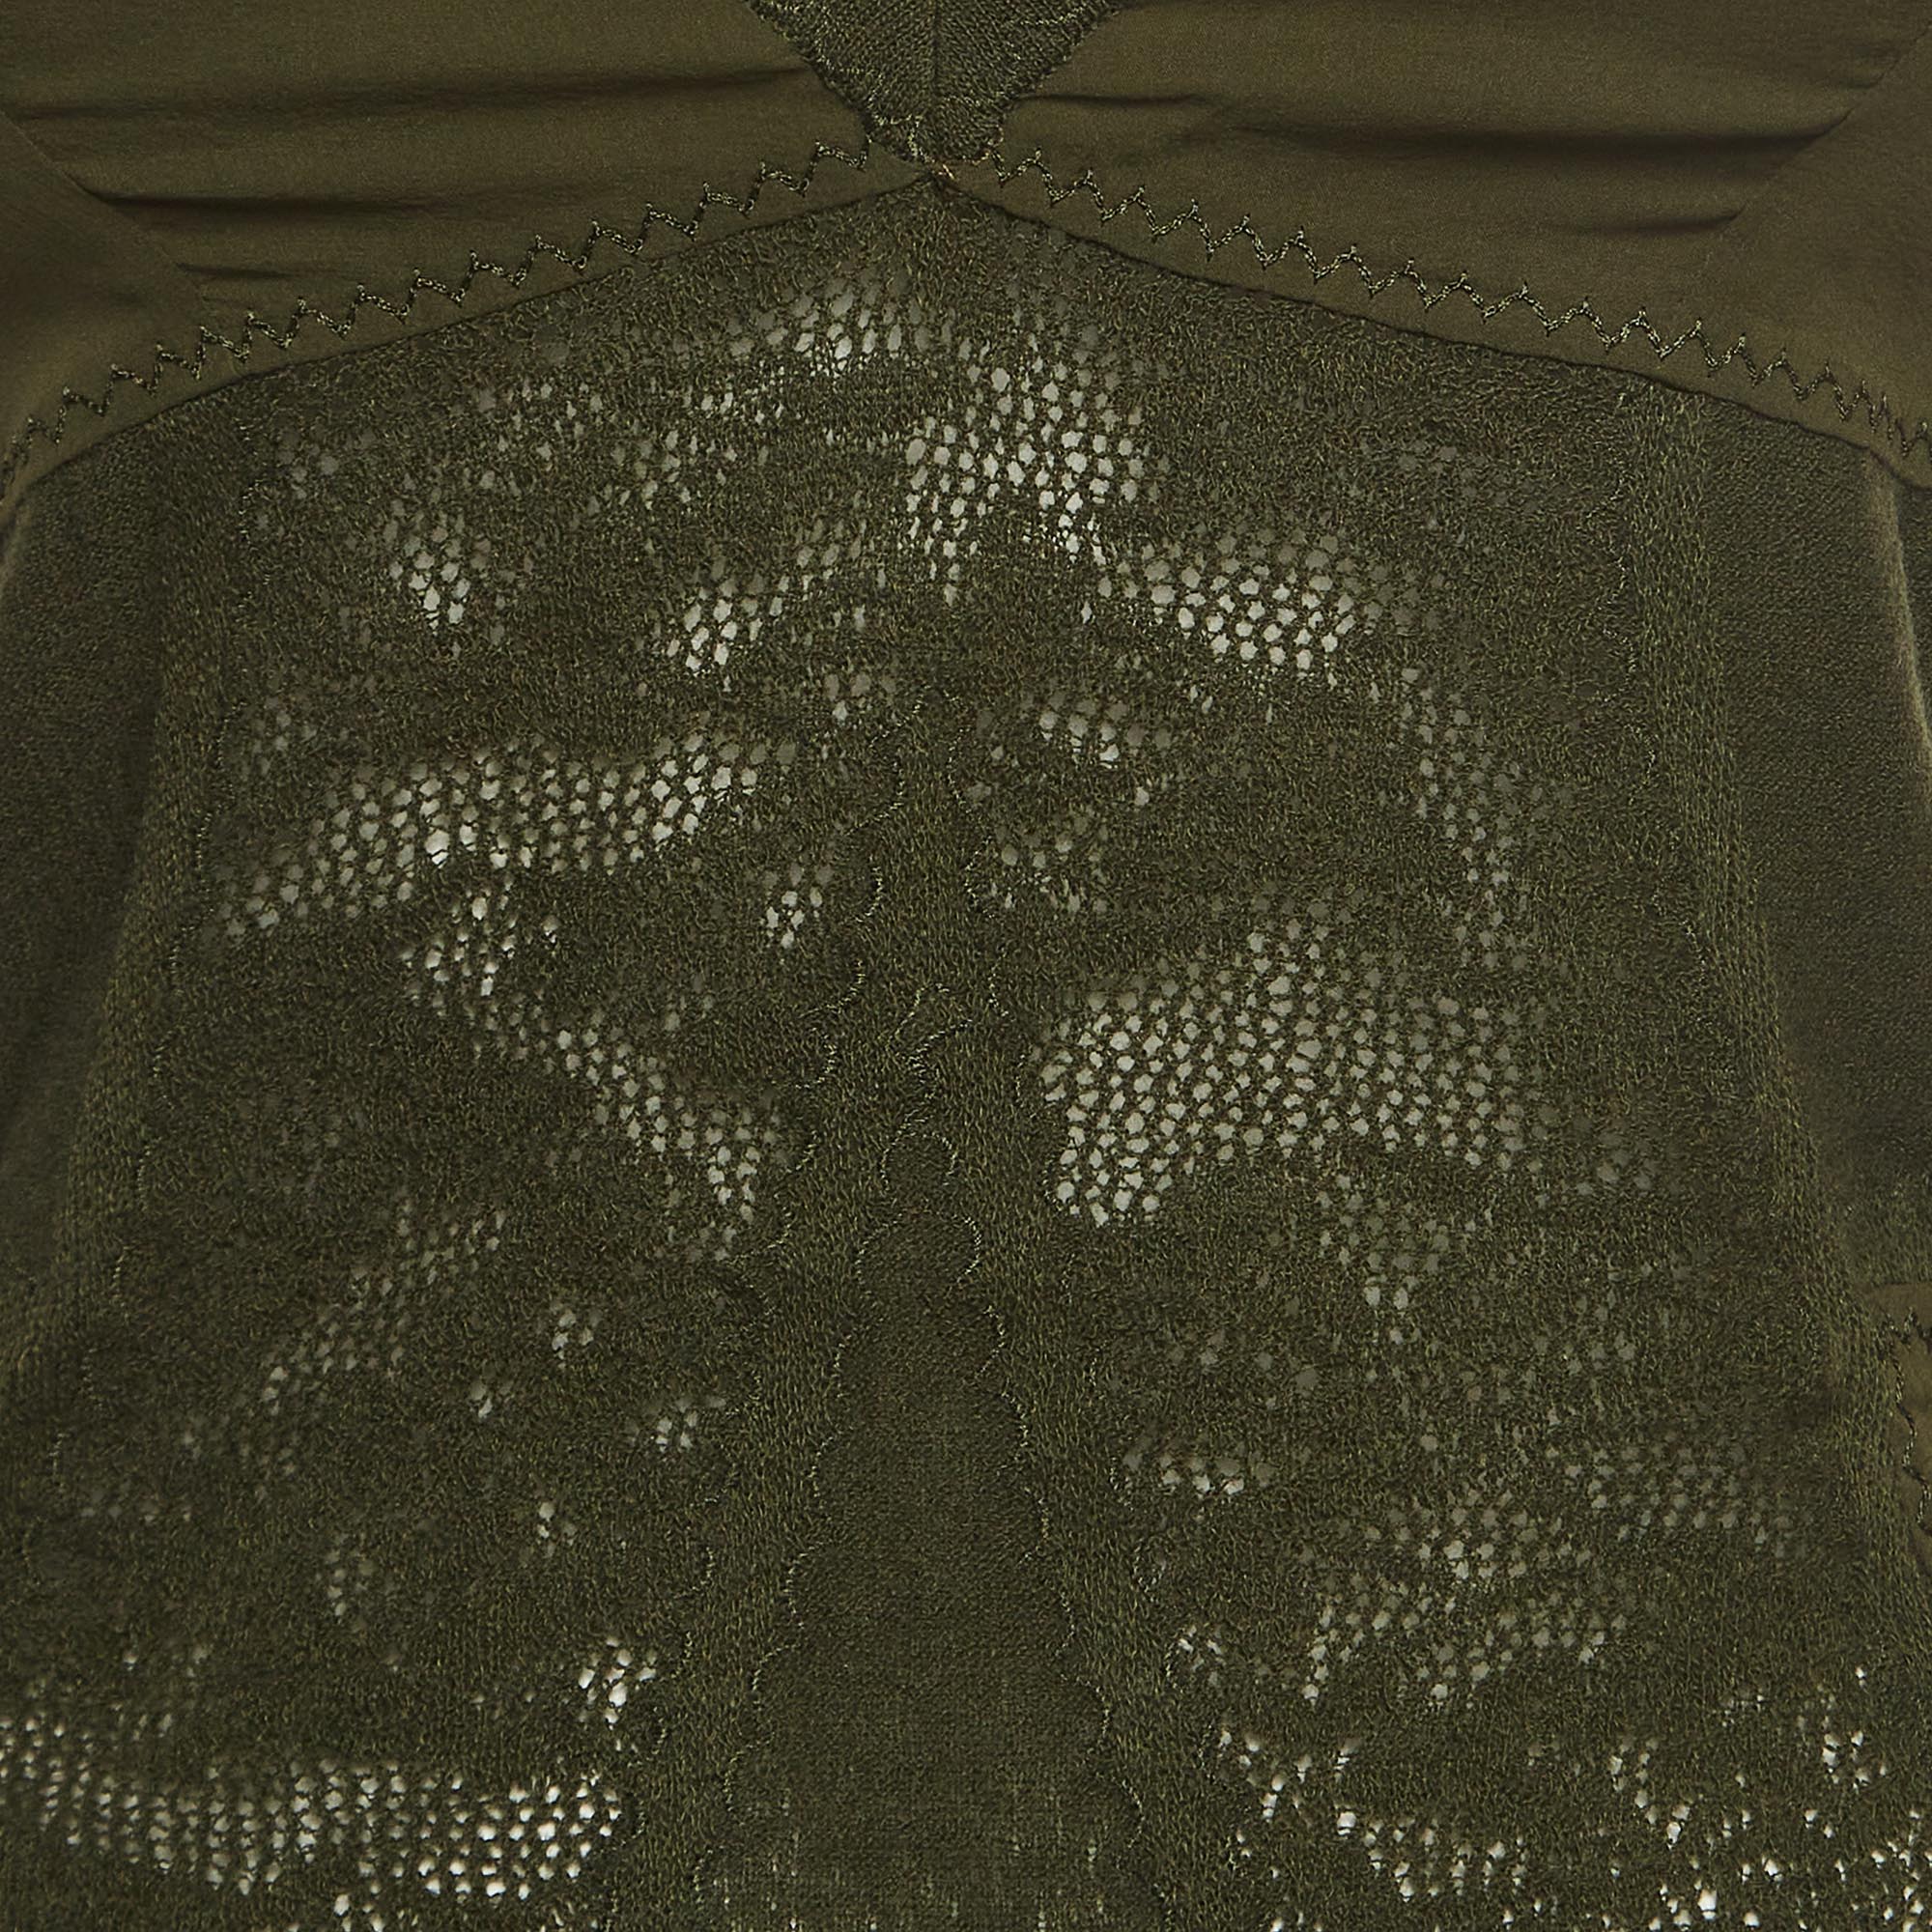 Christian Dior Boutique Military Green Wool Blend Knit Tank Top M